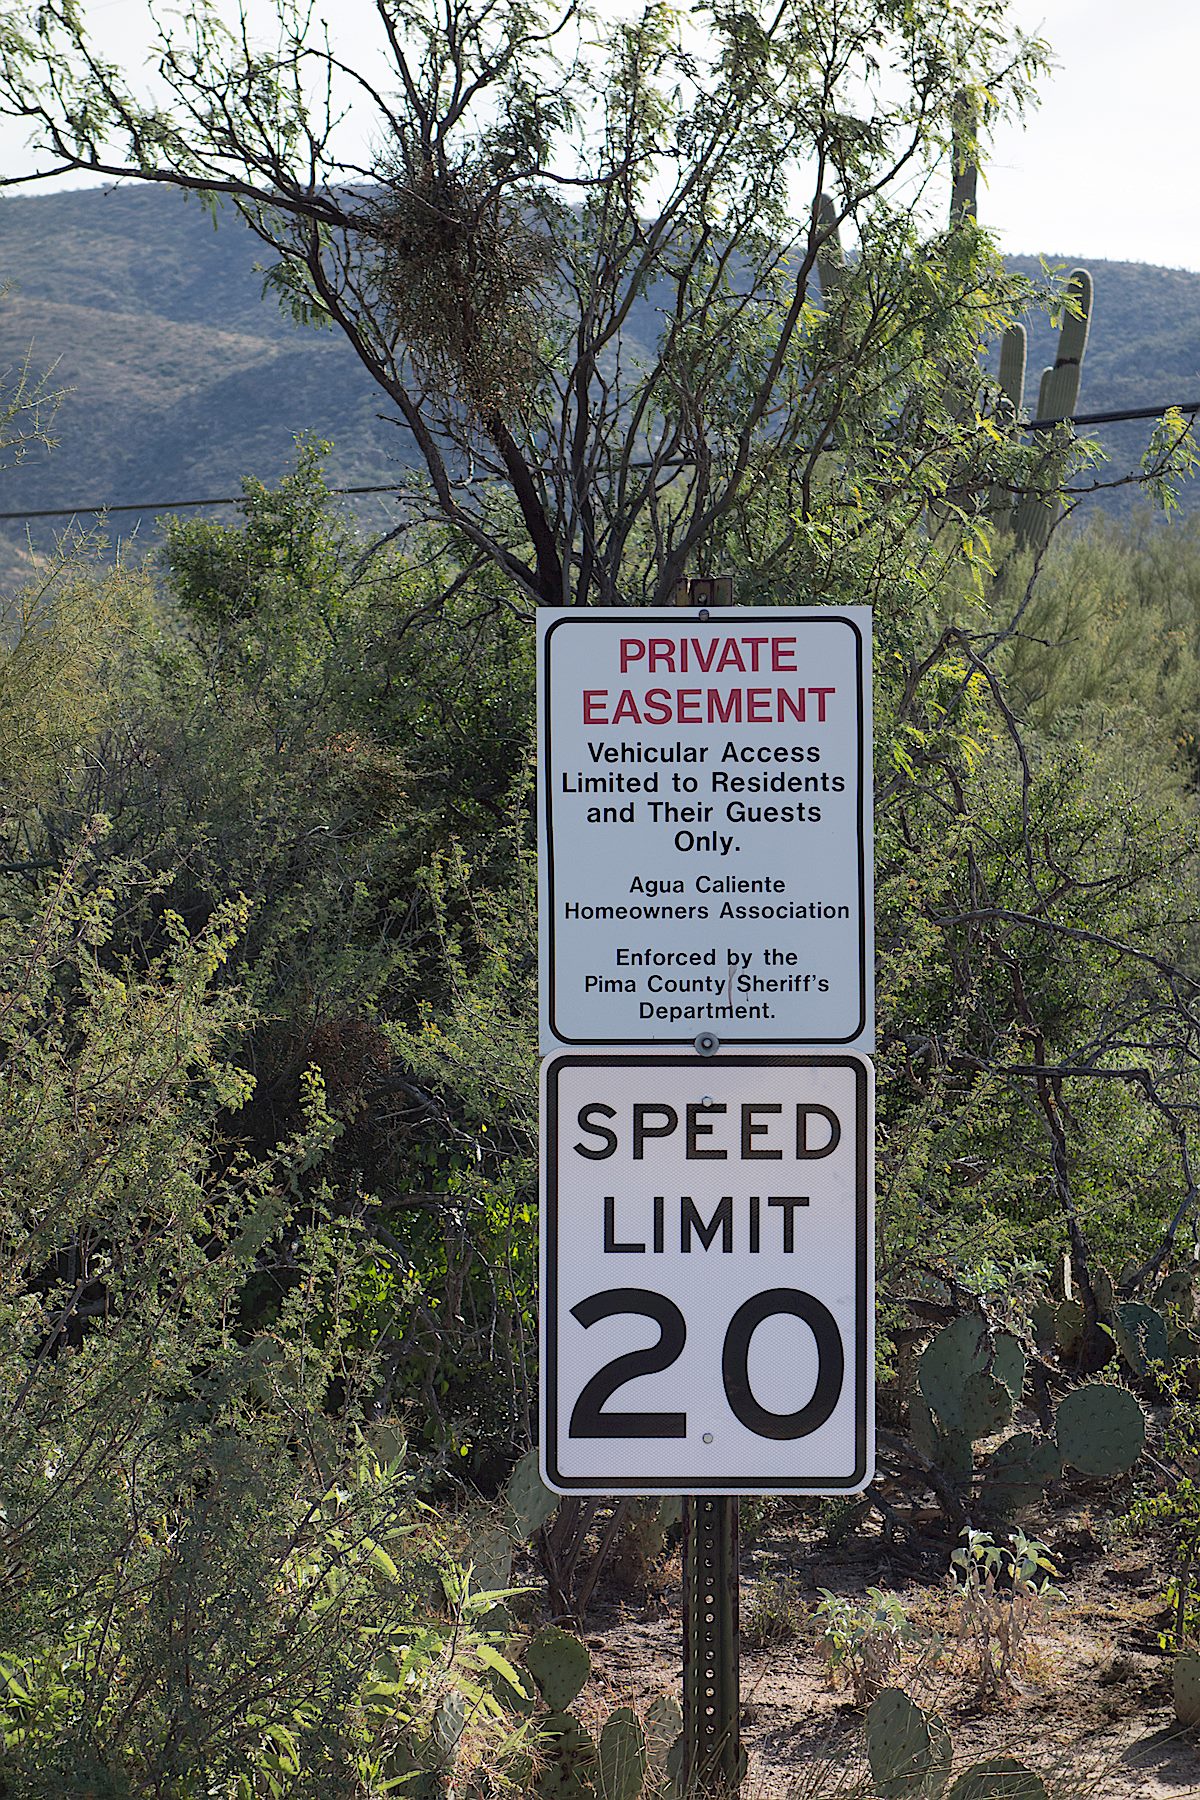 The Avenida de Suzenu Trailhead does not have any signage with the name of the trailhead - this Private Easement sign is one of the few details that hints that this is a well known parking area/trailhead. December 2014.